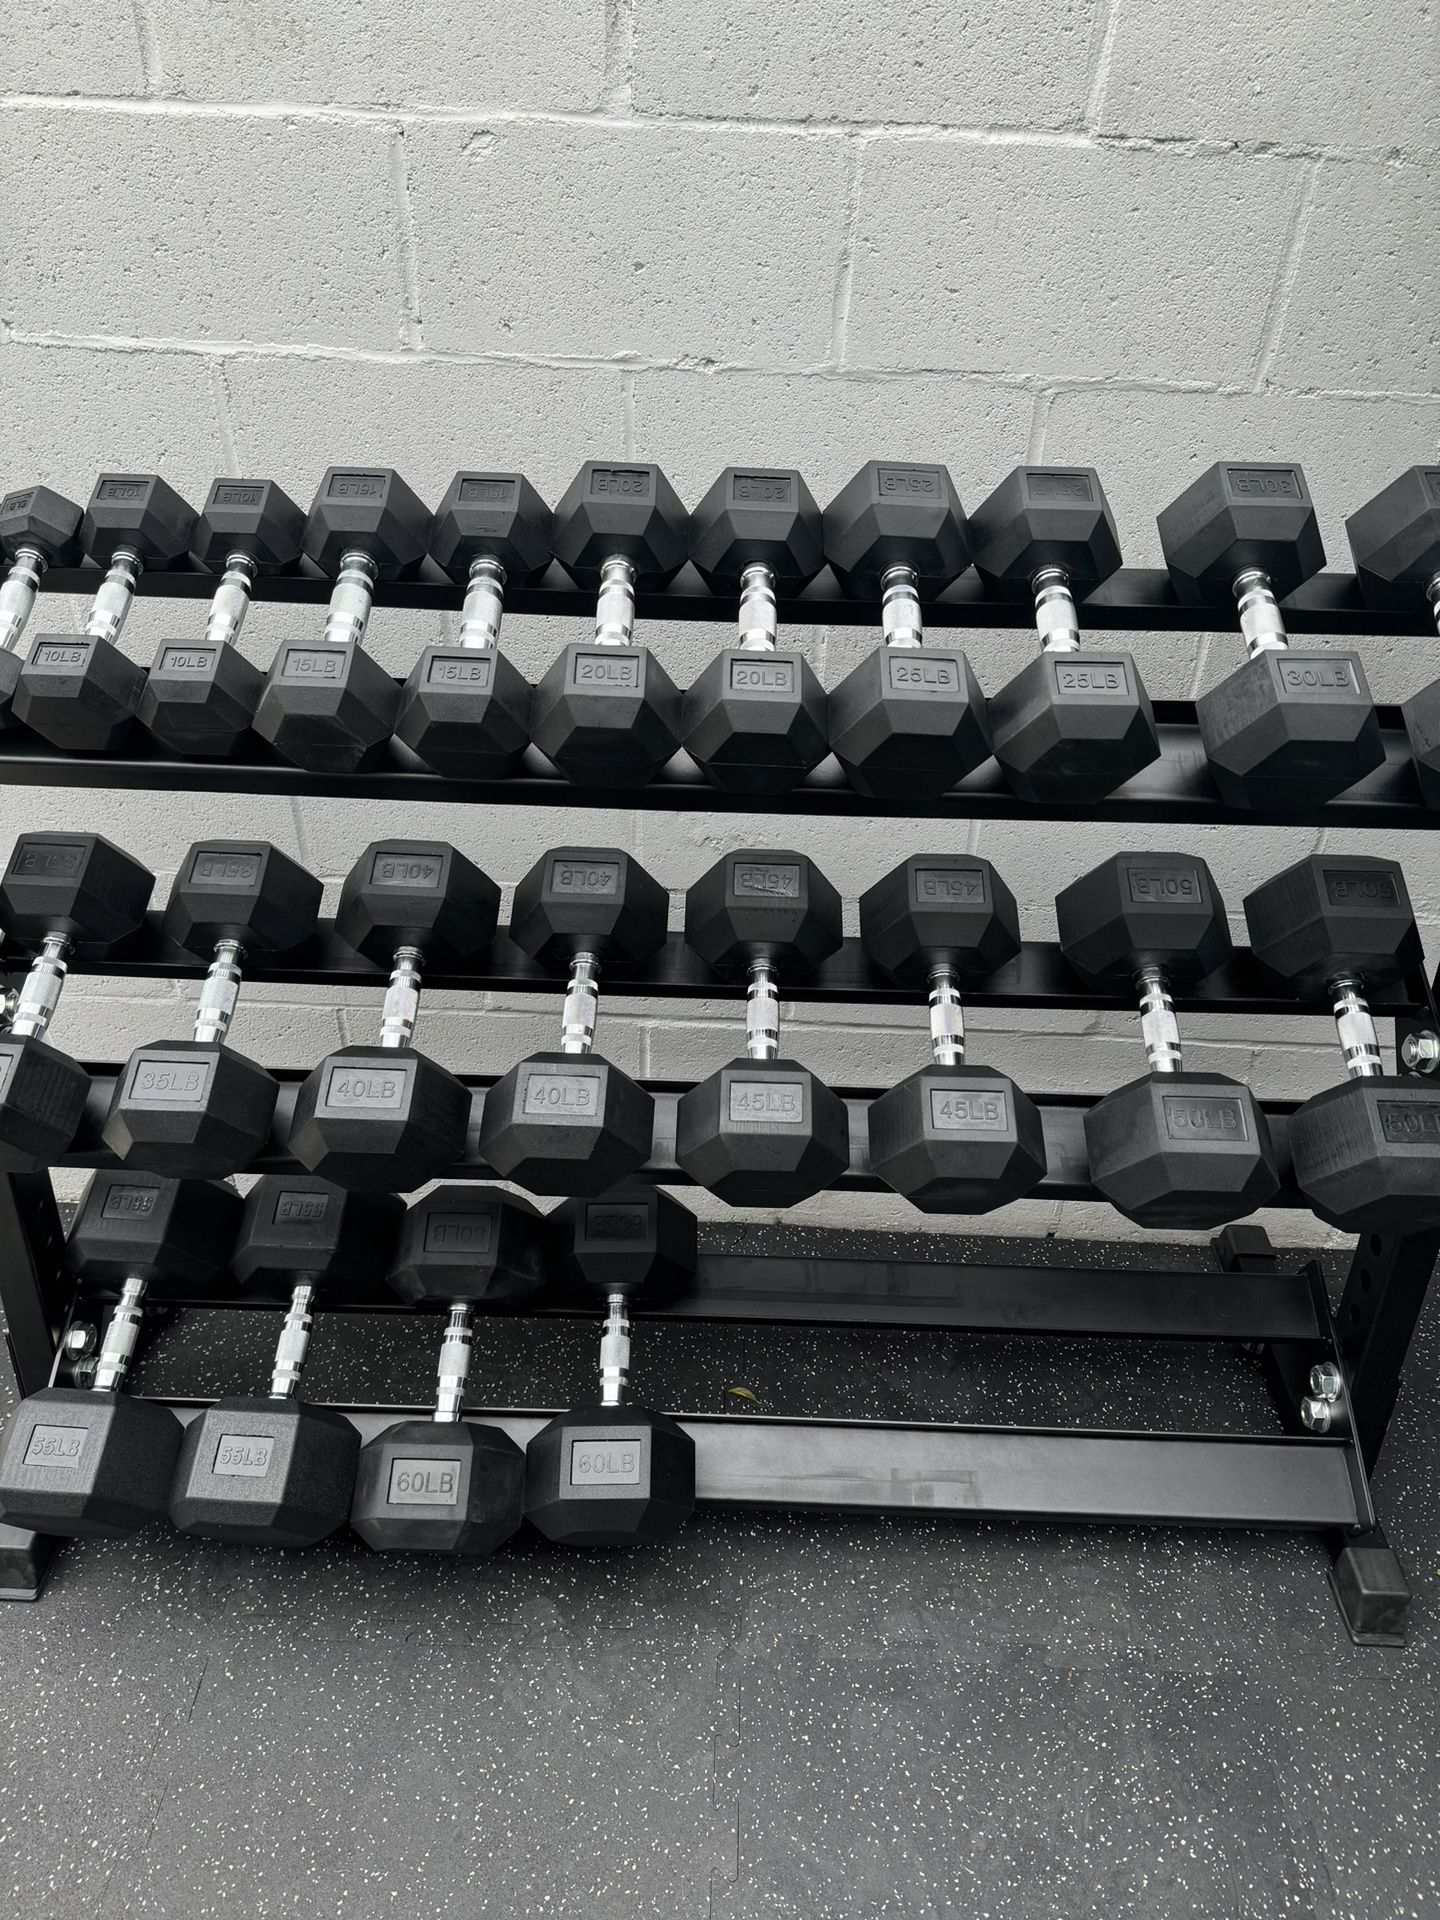 New Rubber Hex Dumbbells 5lbs-50lbs/Dumbbell rack included/ Gym Equipment/Weights/Exercise/Training 